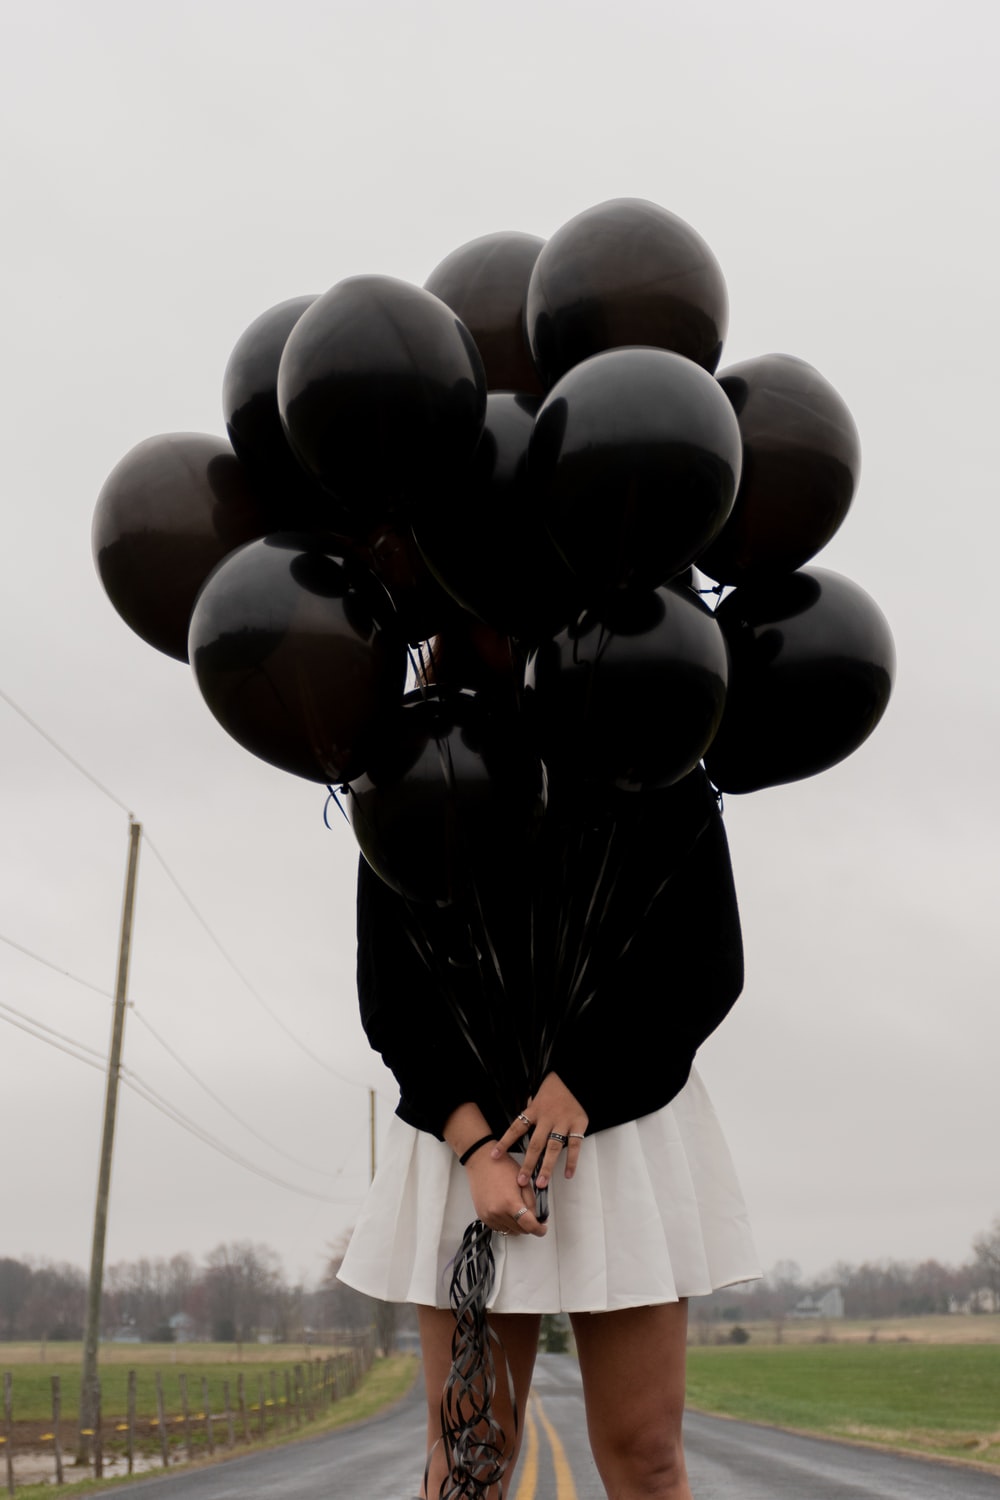 Black Balloons Picture. Download Free Image